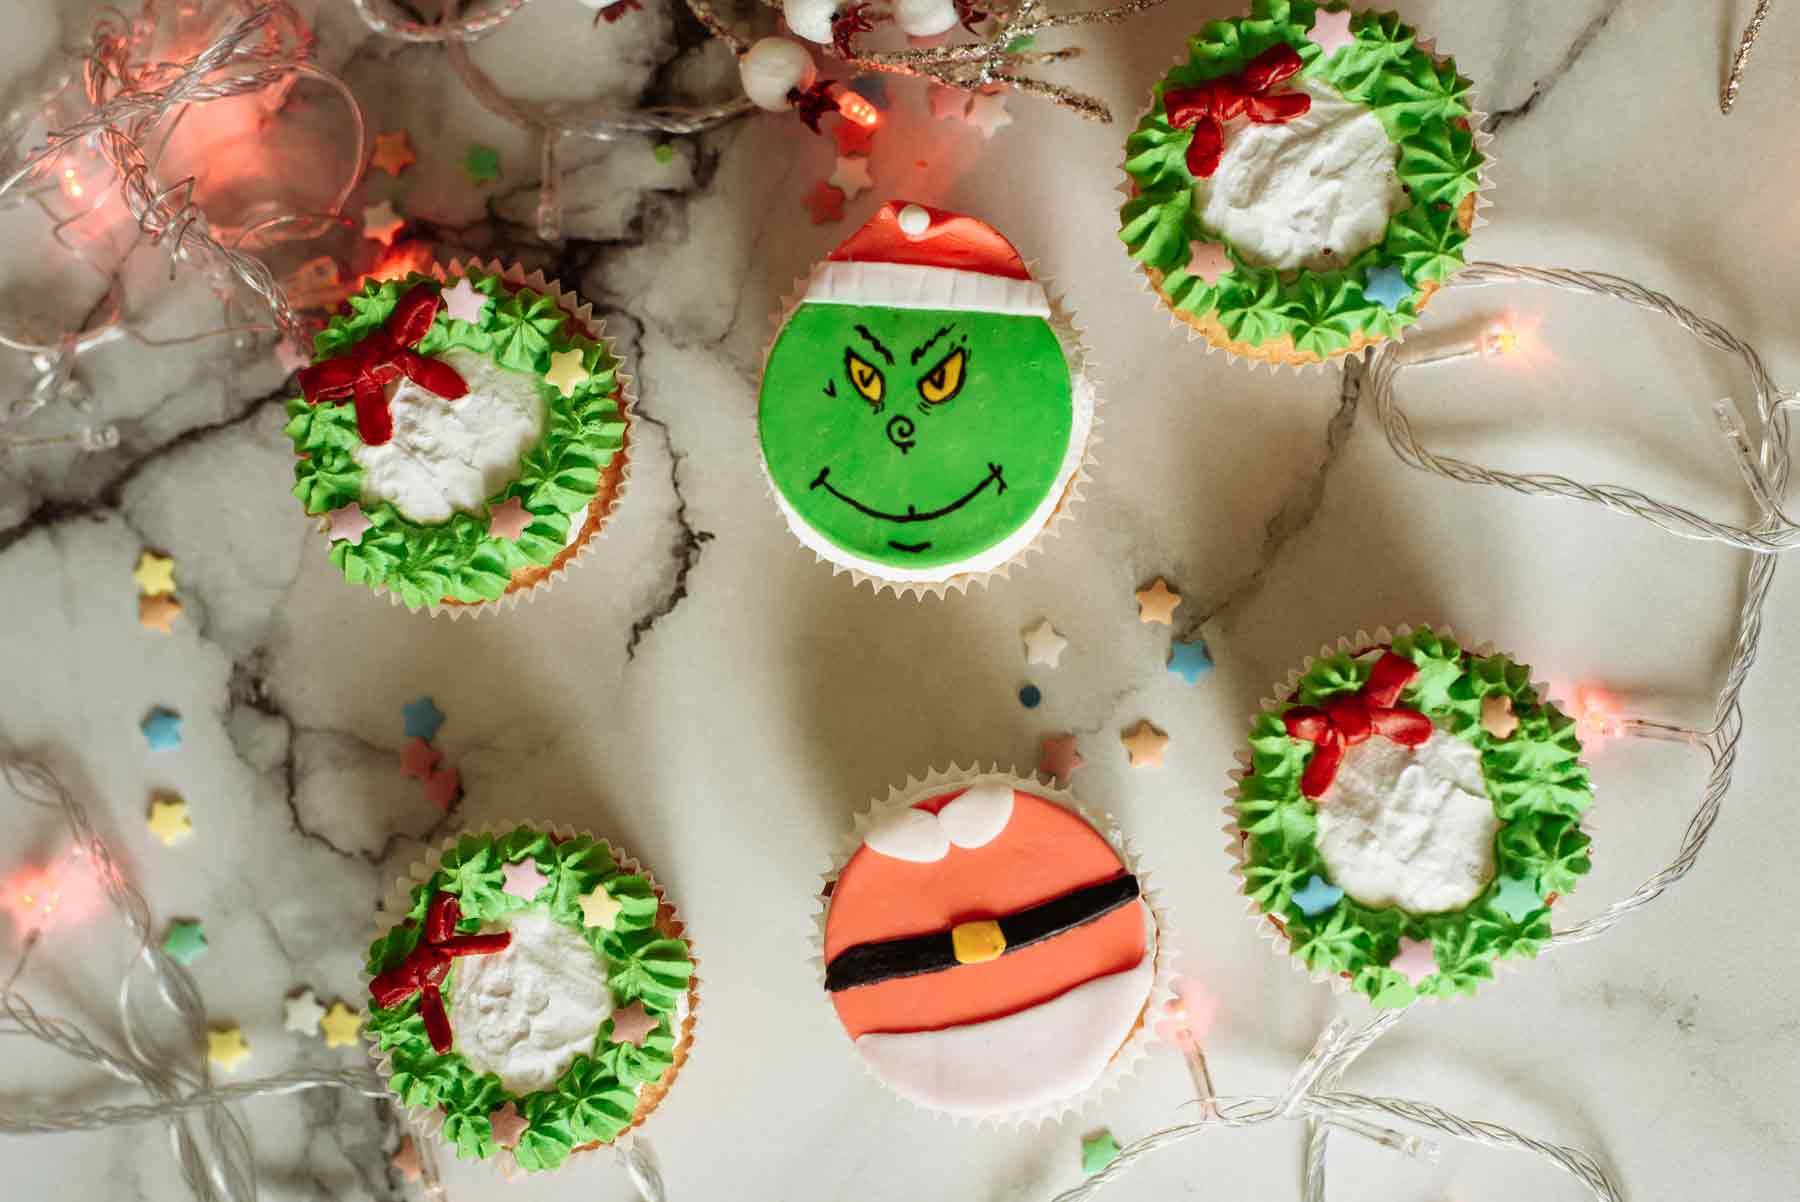 Six Christmas cupcakes (one decorated with a grinch face) with Christmas lights and marzipan stars scattered on a white surface